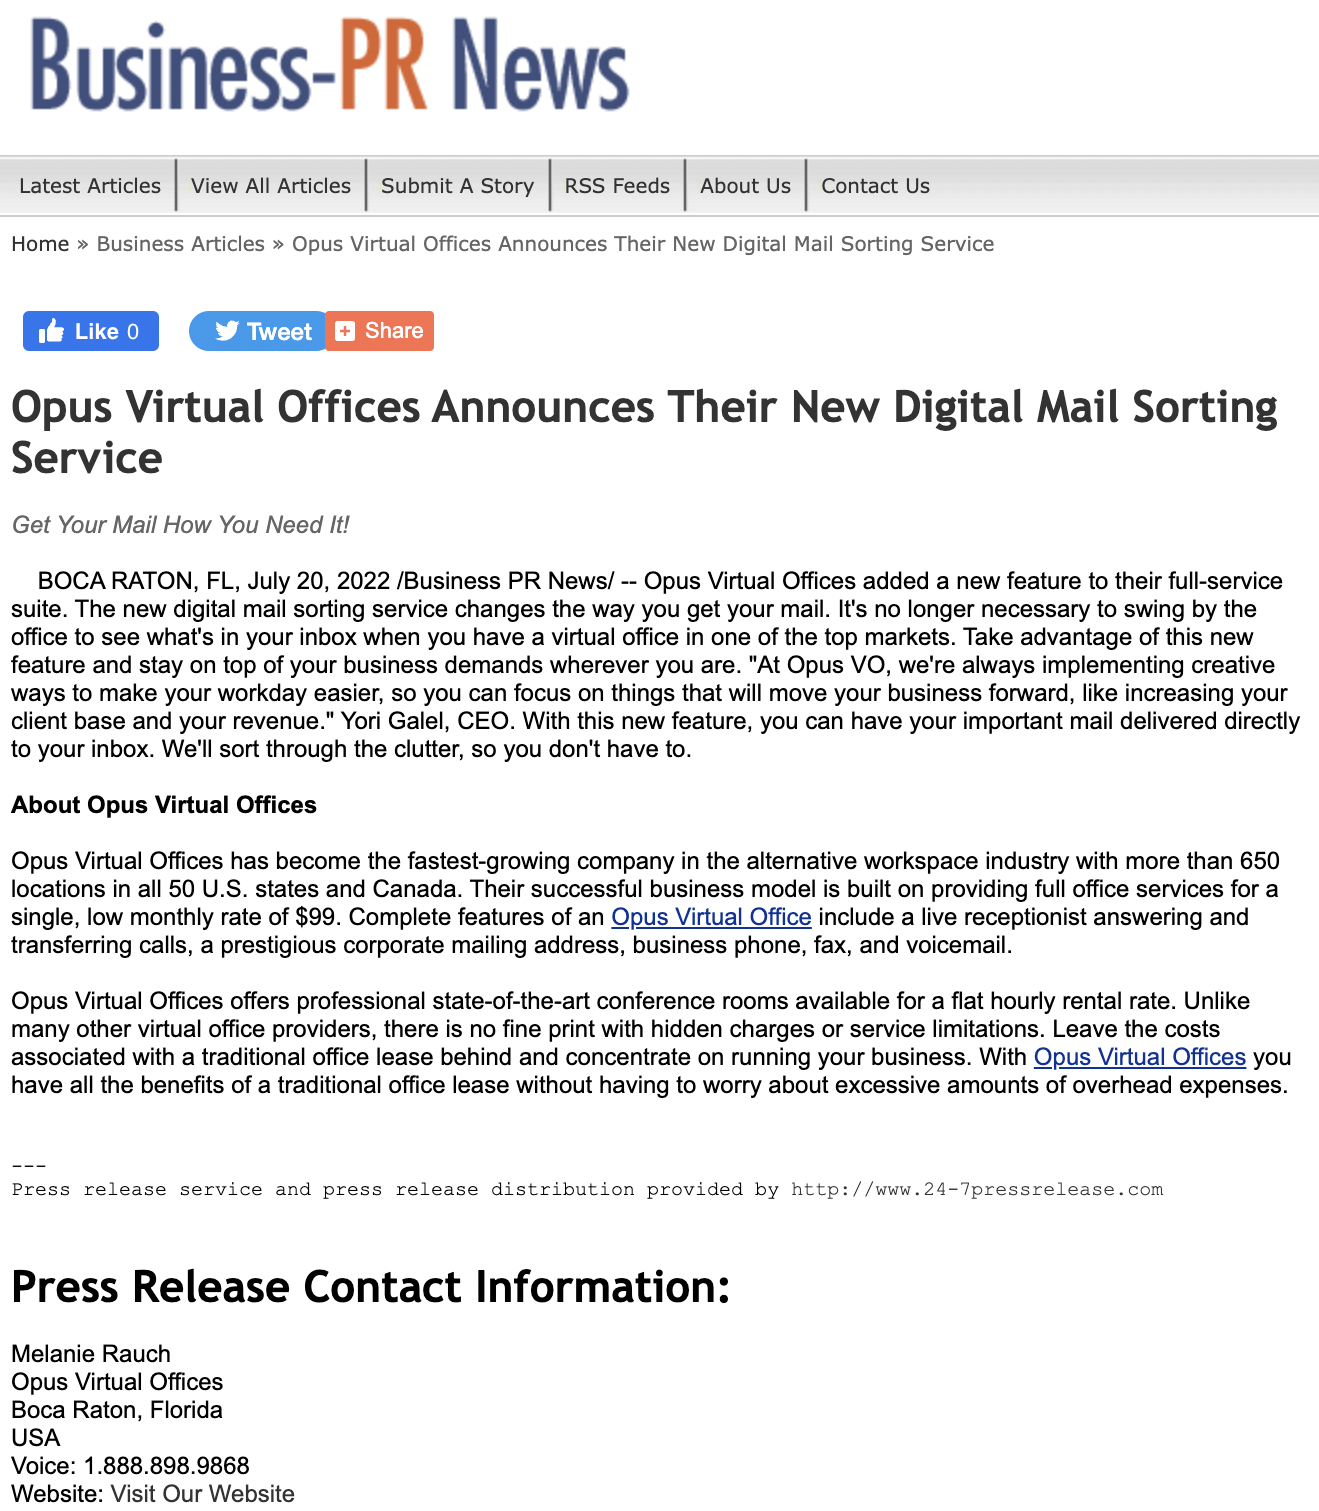 Opus Virtual Offices Announces Release of Digital Mail Sorting Service